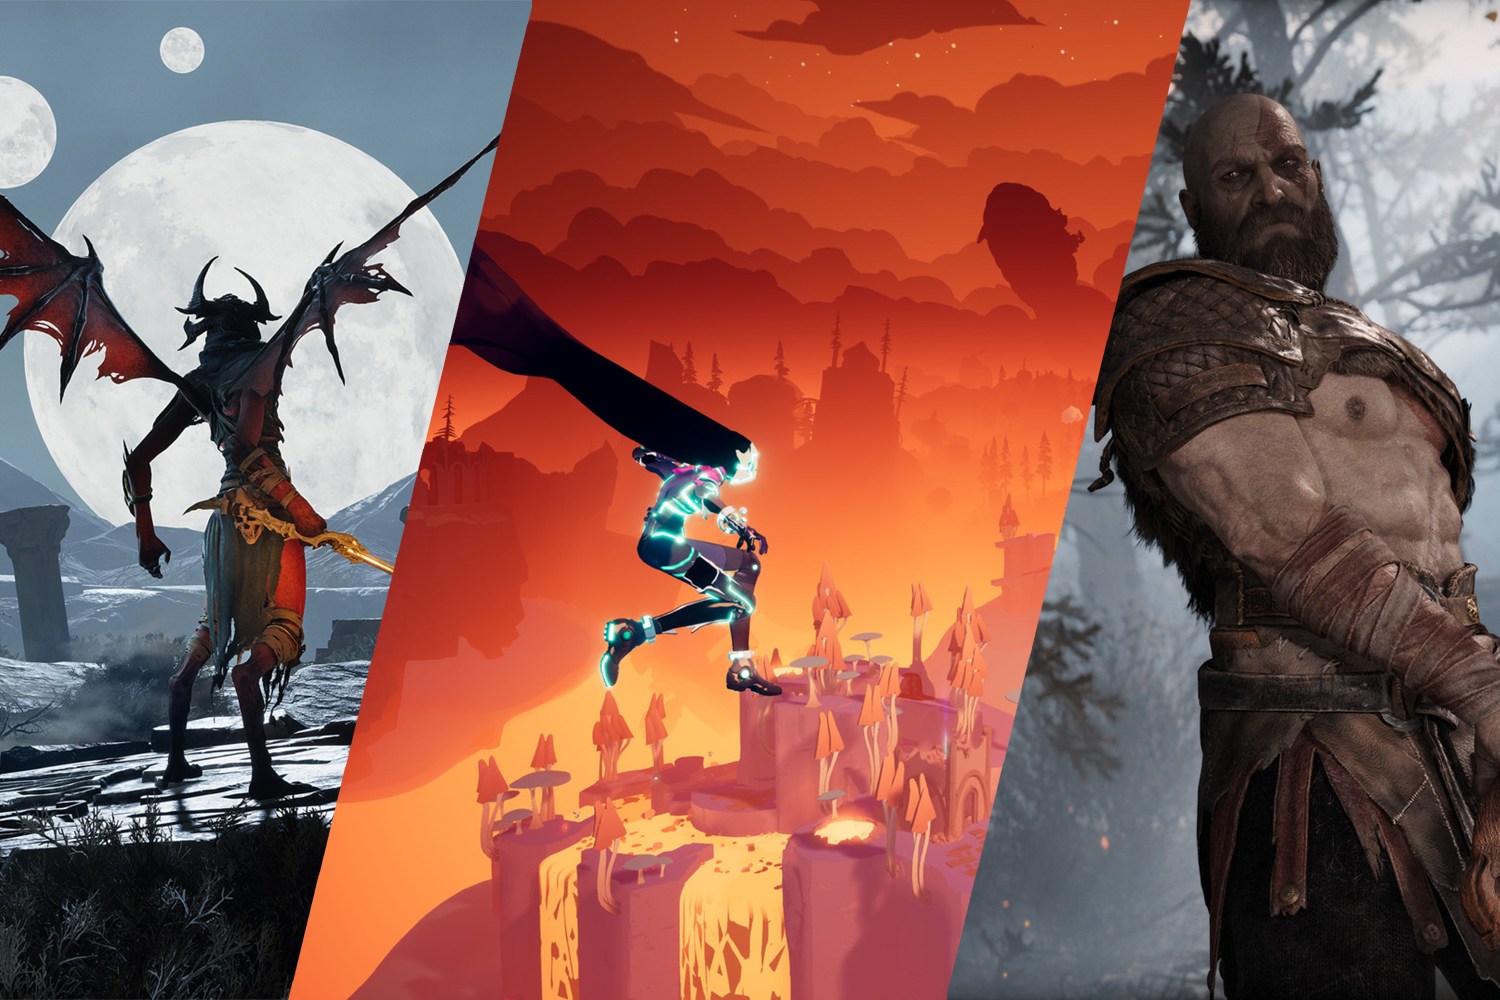 Steam tempts with 4 enthralling action games 2022 at all- time low prices - News